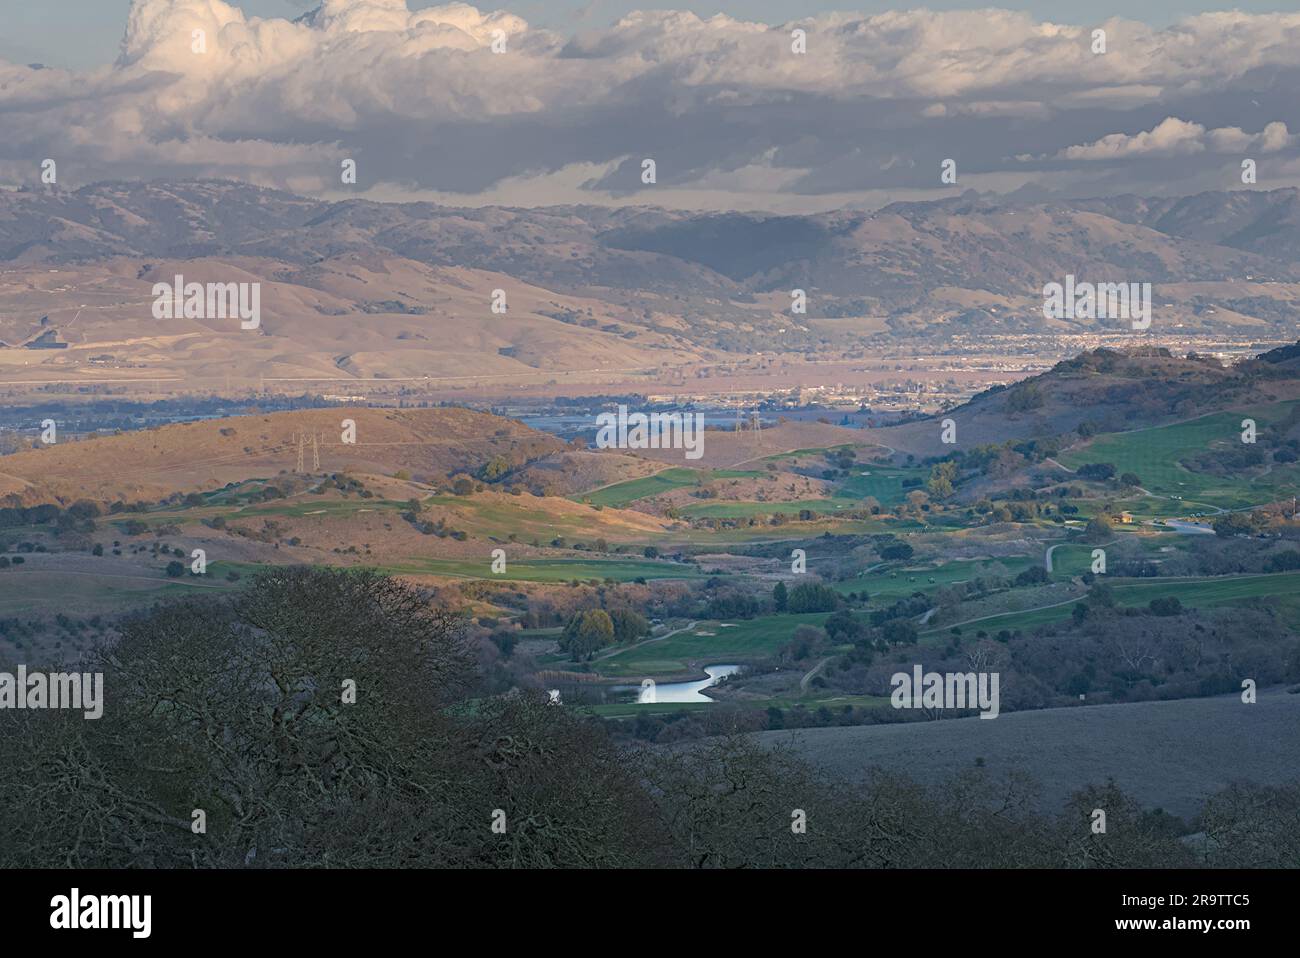 View of Silicon Valley under cloudy sky at sunset. Stock Photo